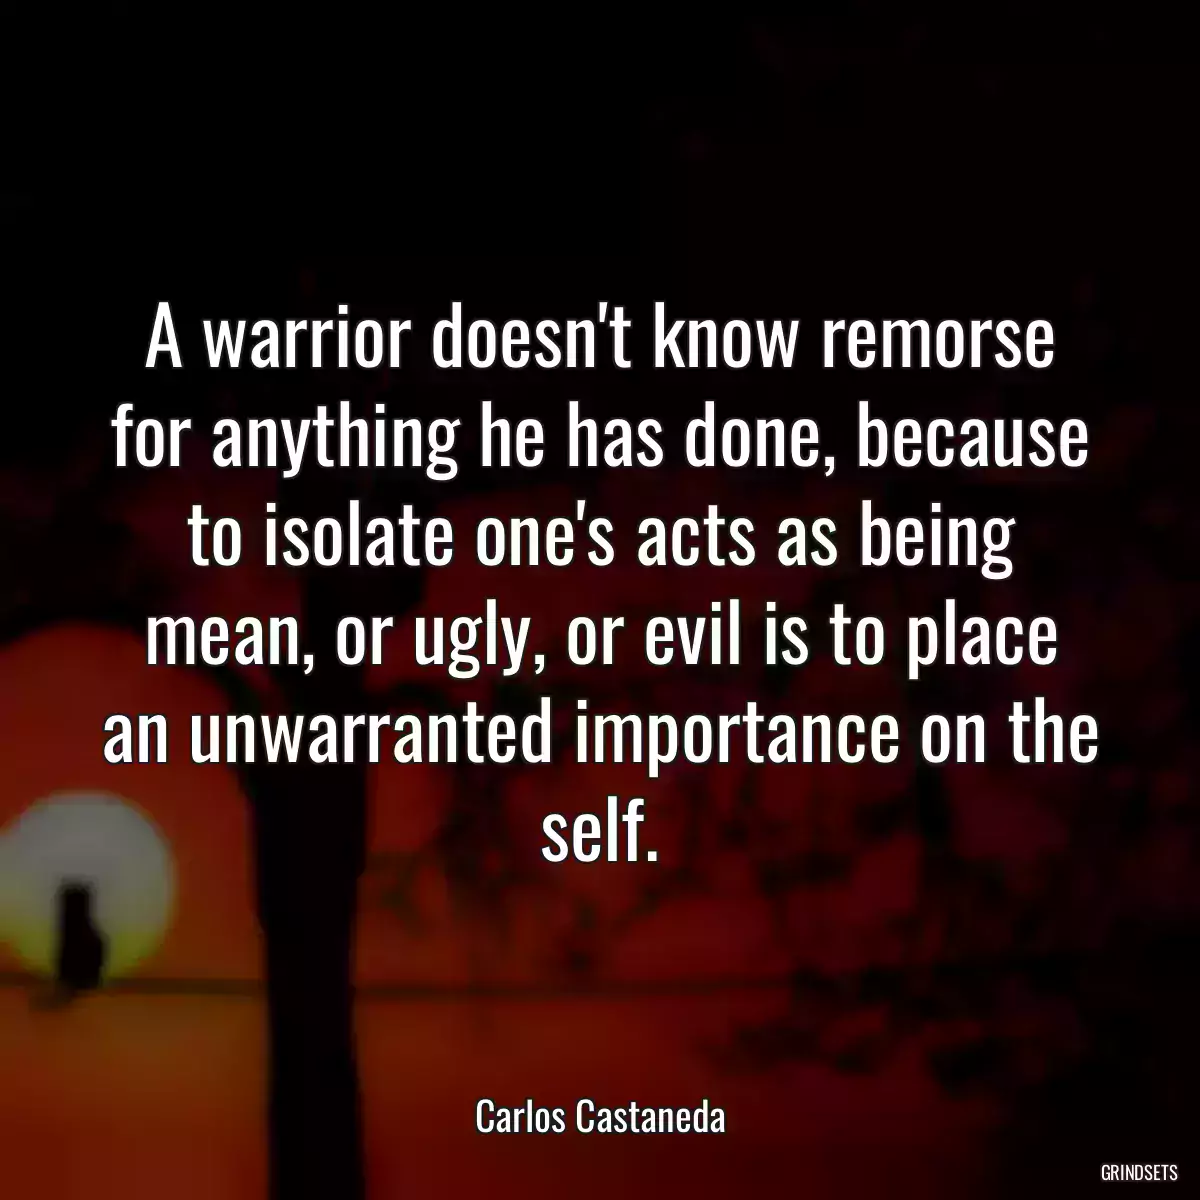 A warrior doesn\'t know remorse for anything he has done, because to isolate one\'s acts as being mean, or ugly, or evil is to place an unwarranted importance on the self.